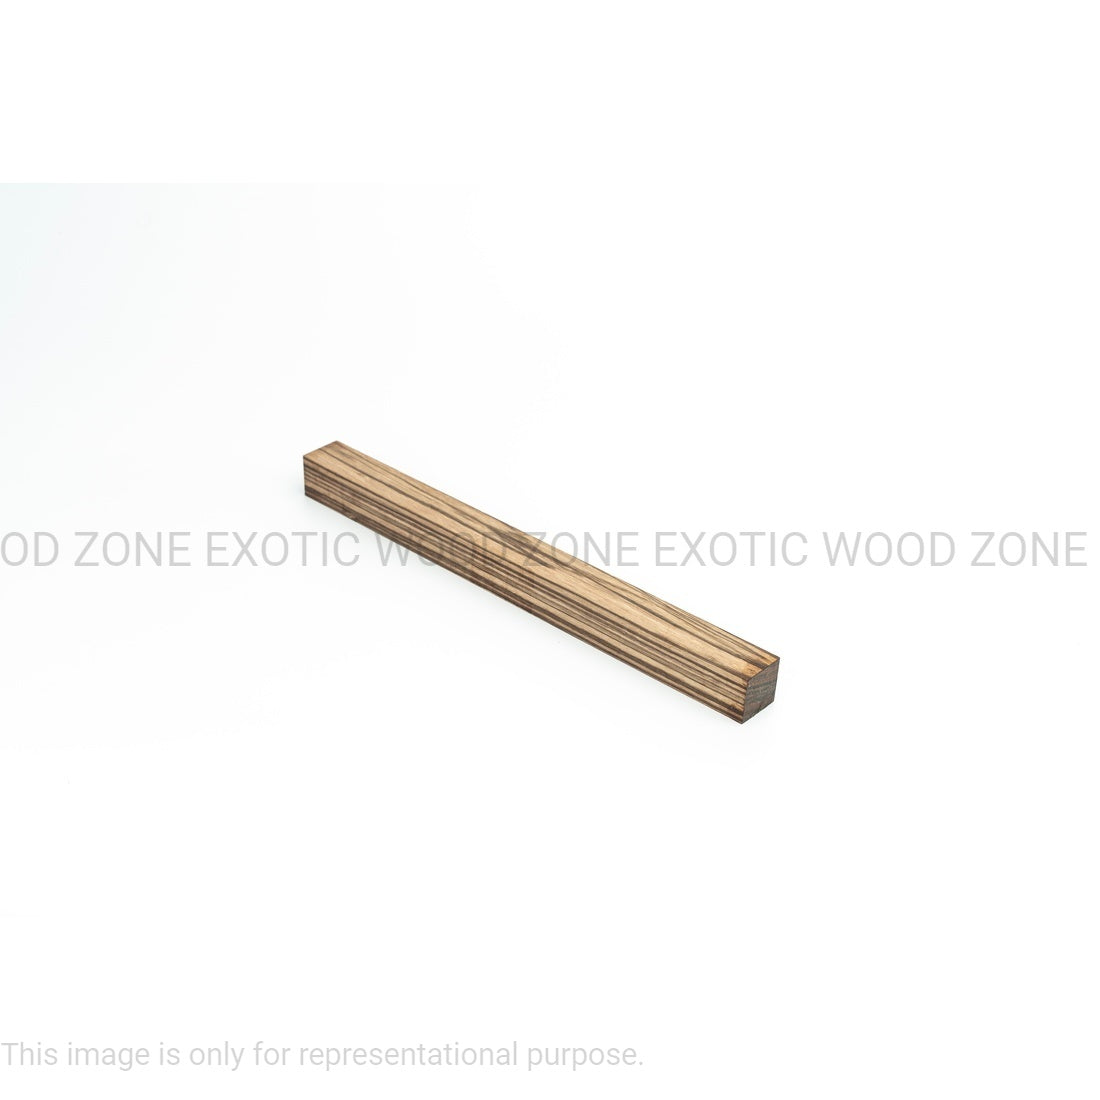 Zebrawood Hobbywood Blank 1&quot; x 1&quot; x 12&quot; inches Exotic Wood Zone